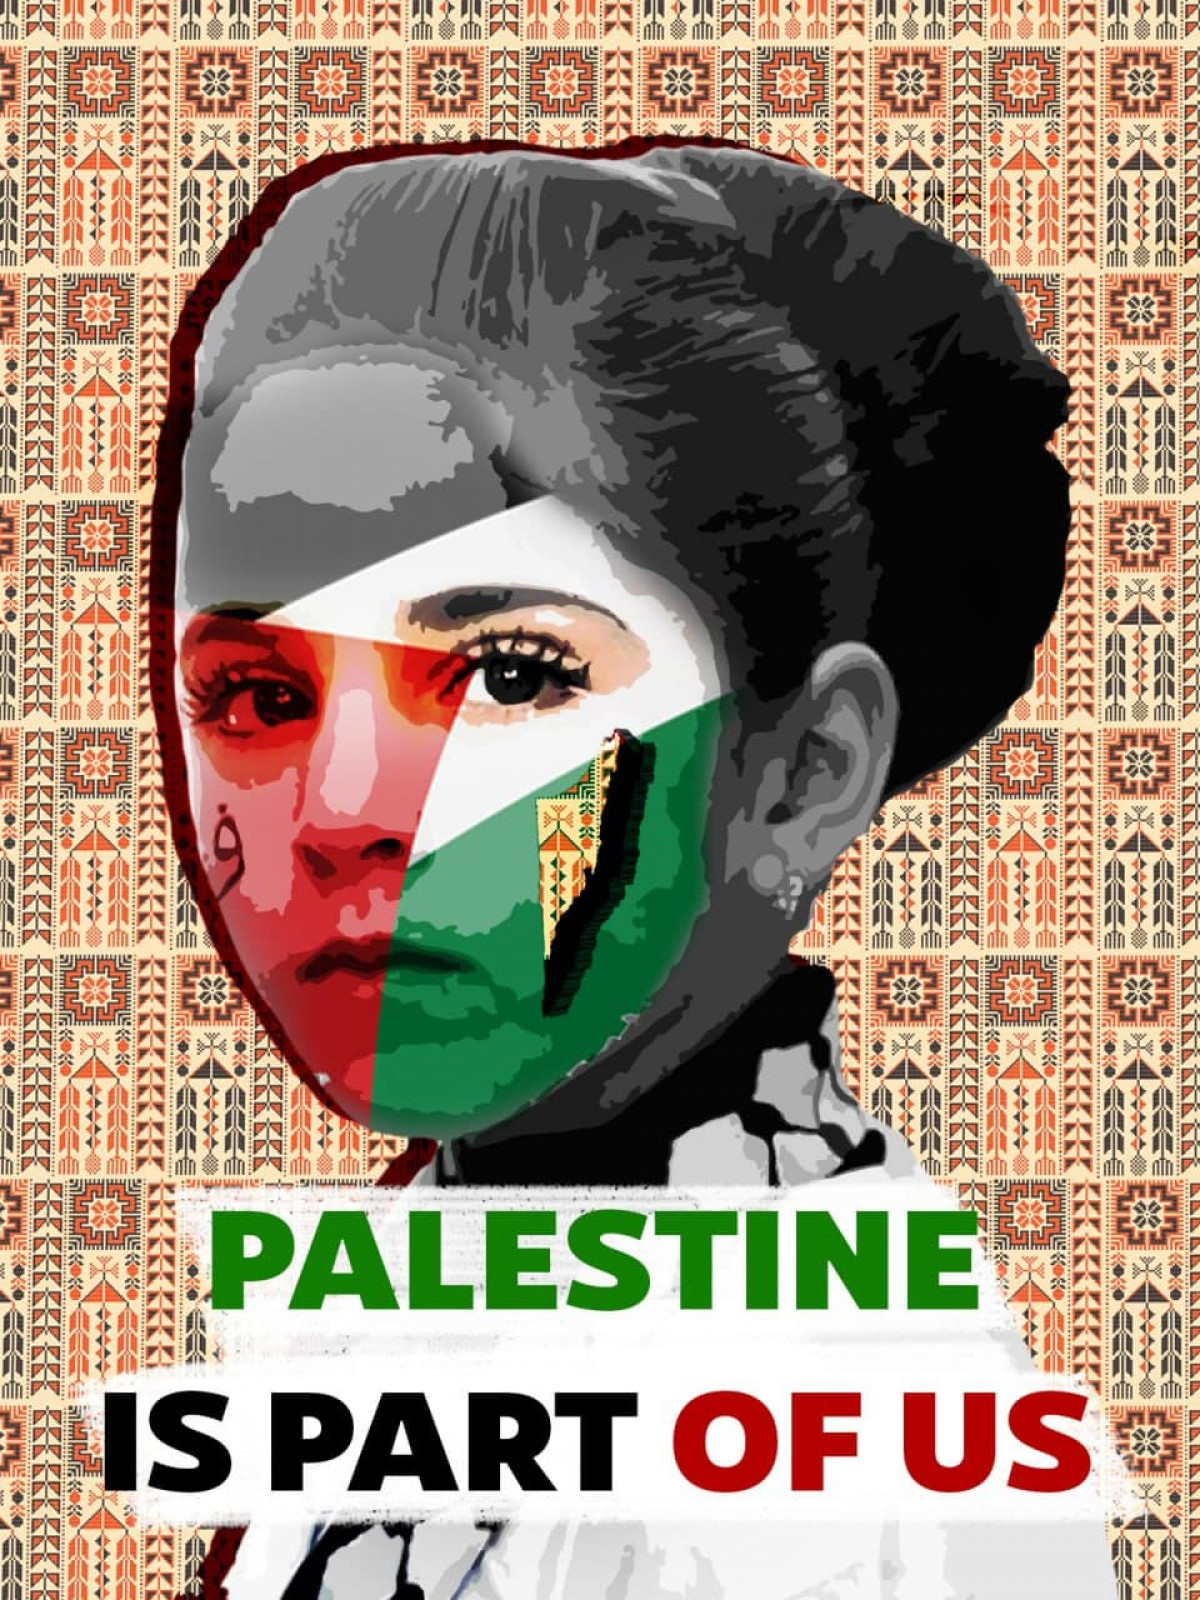 Collection of posters: PALESTINE IS PART OF US